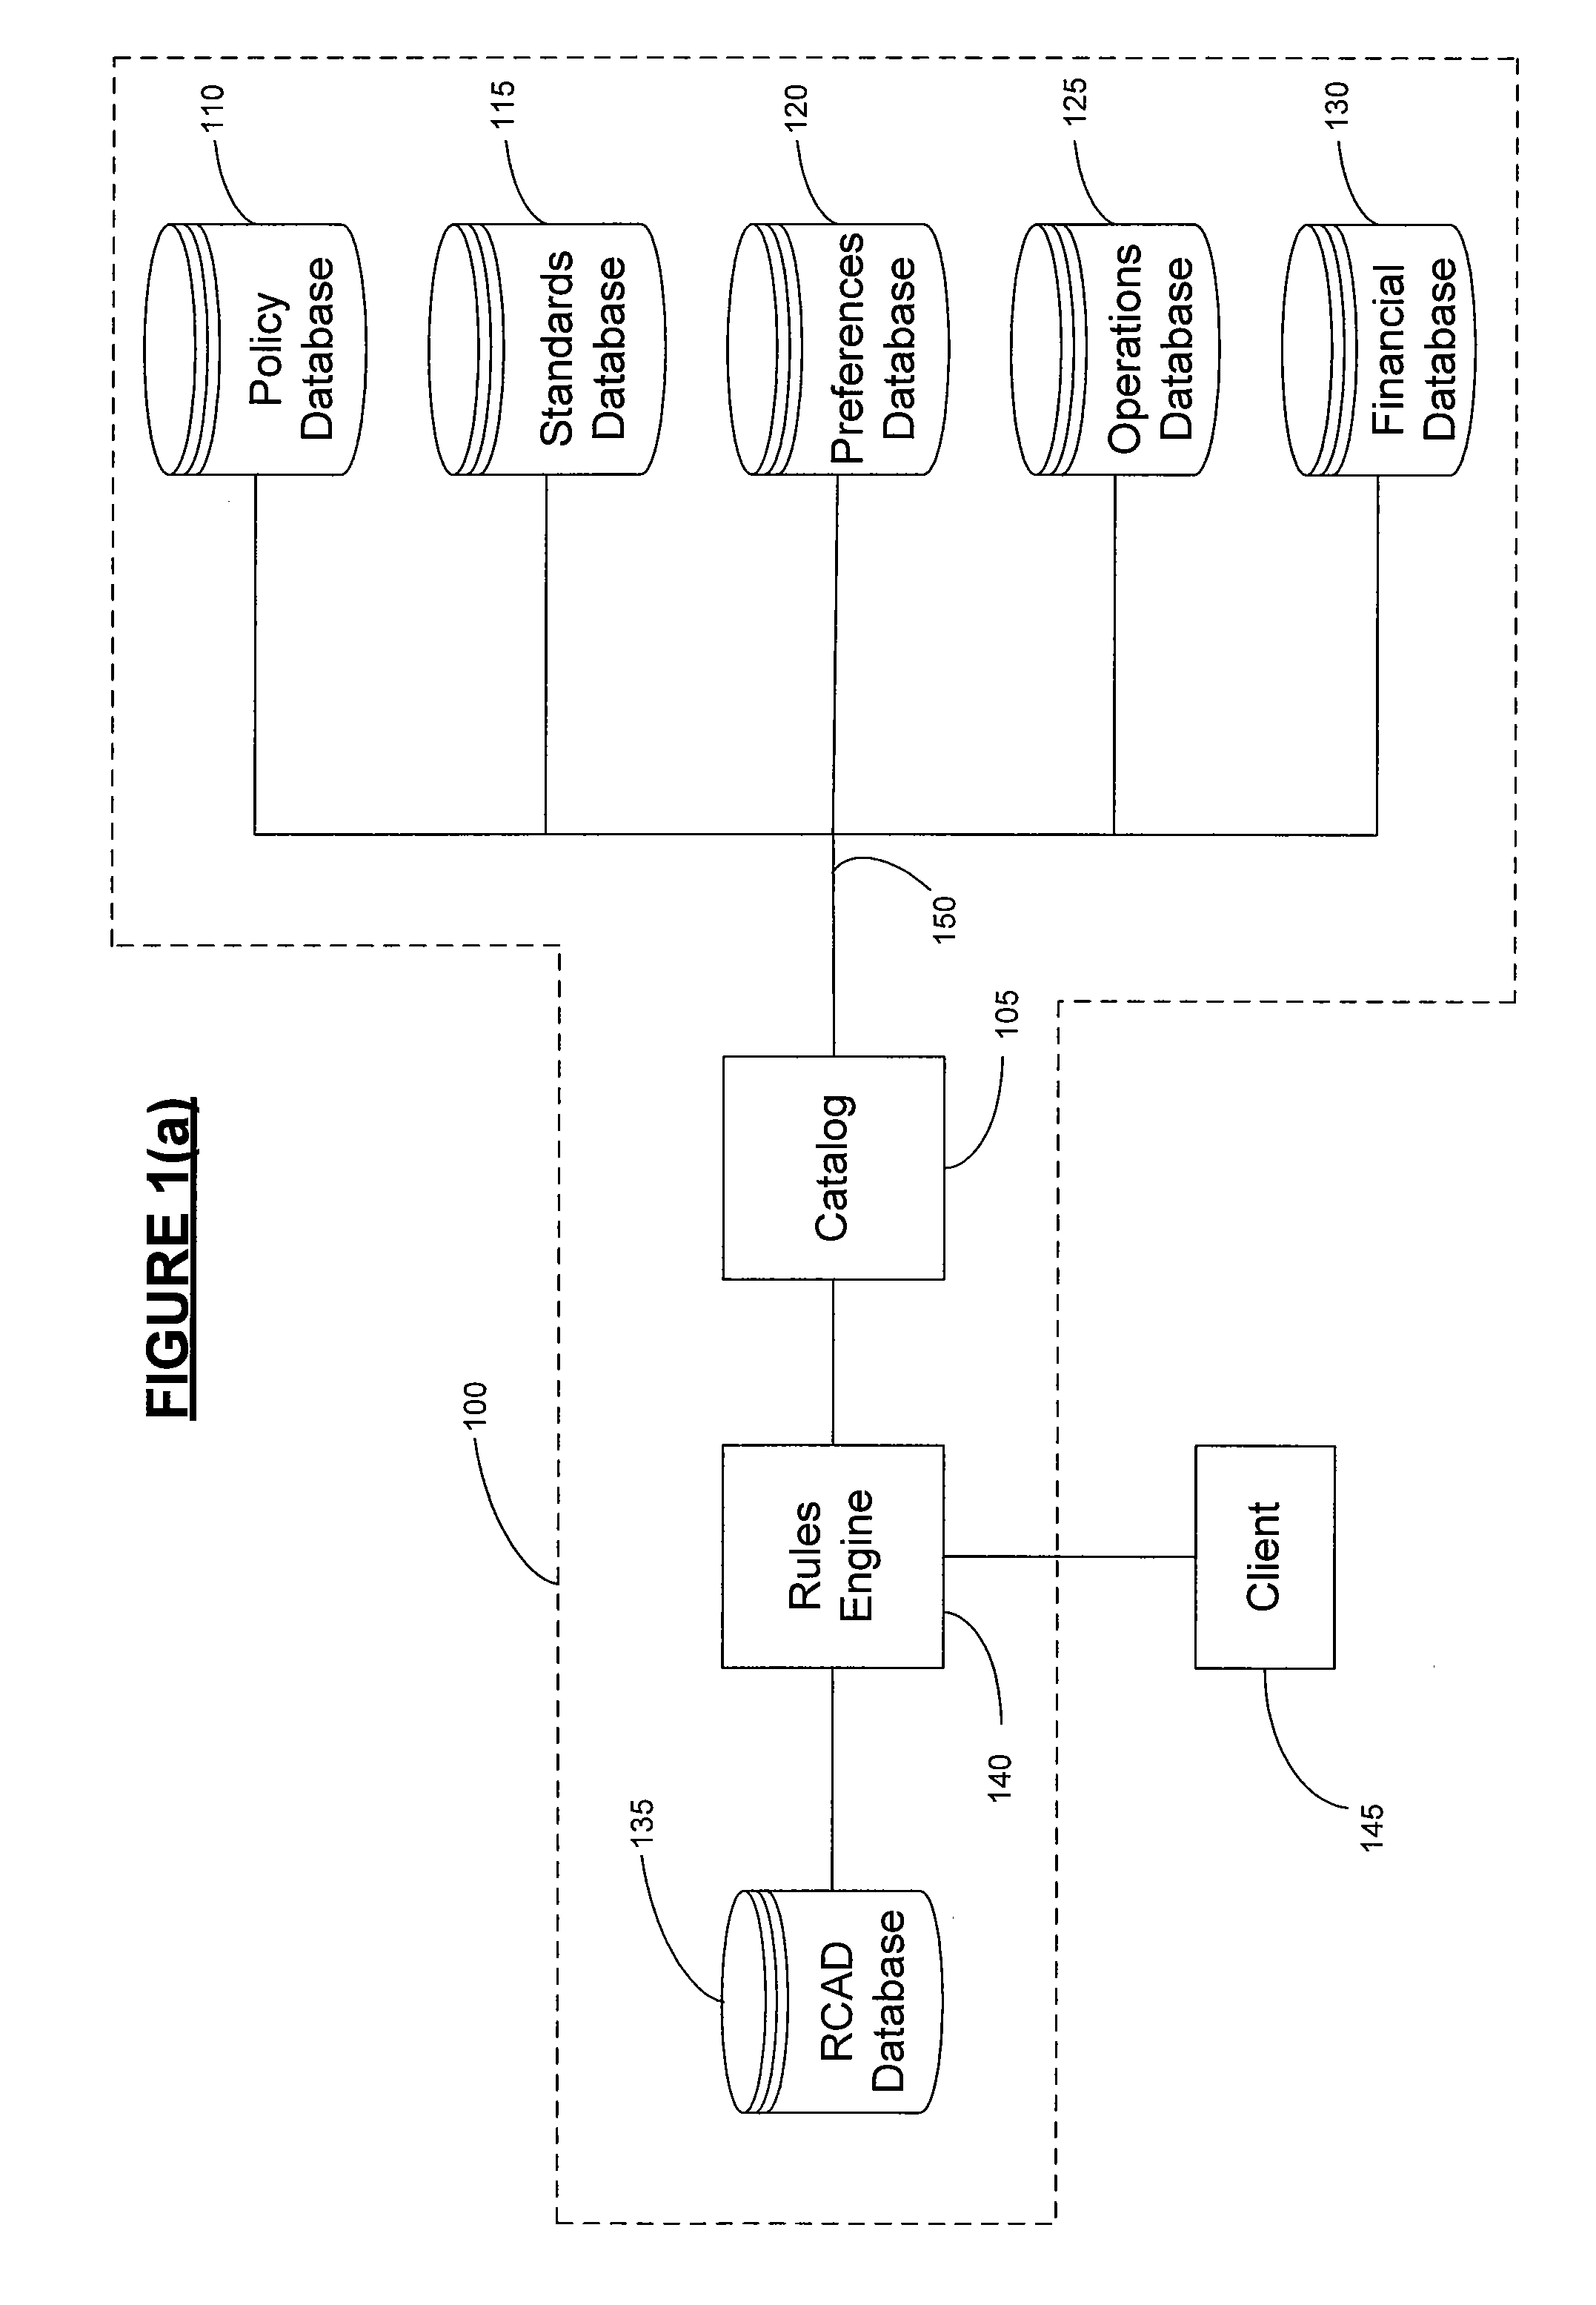 System and method for selecting a suitable technical architecture to implement a proposed solution